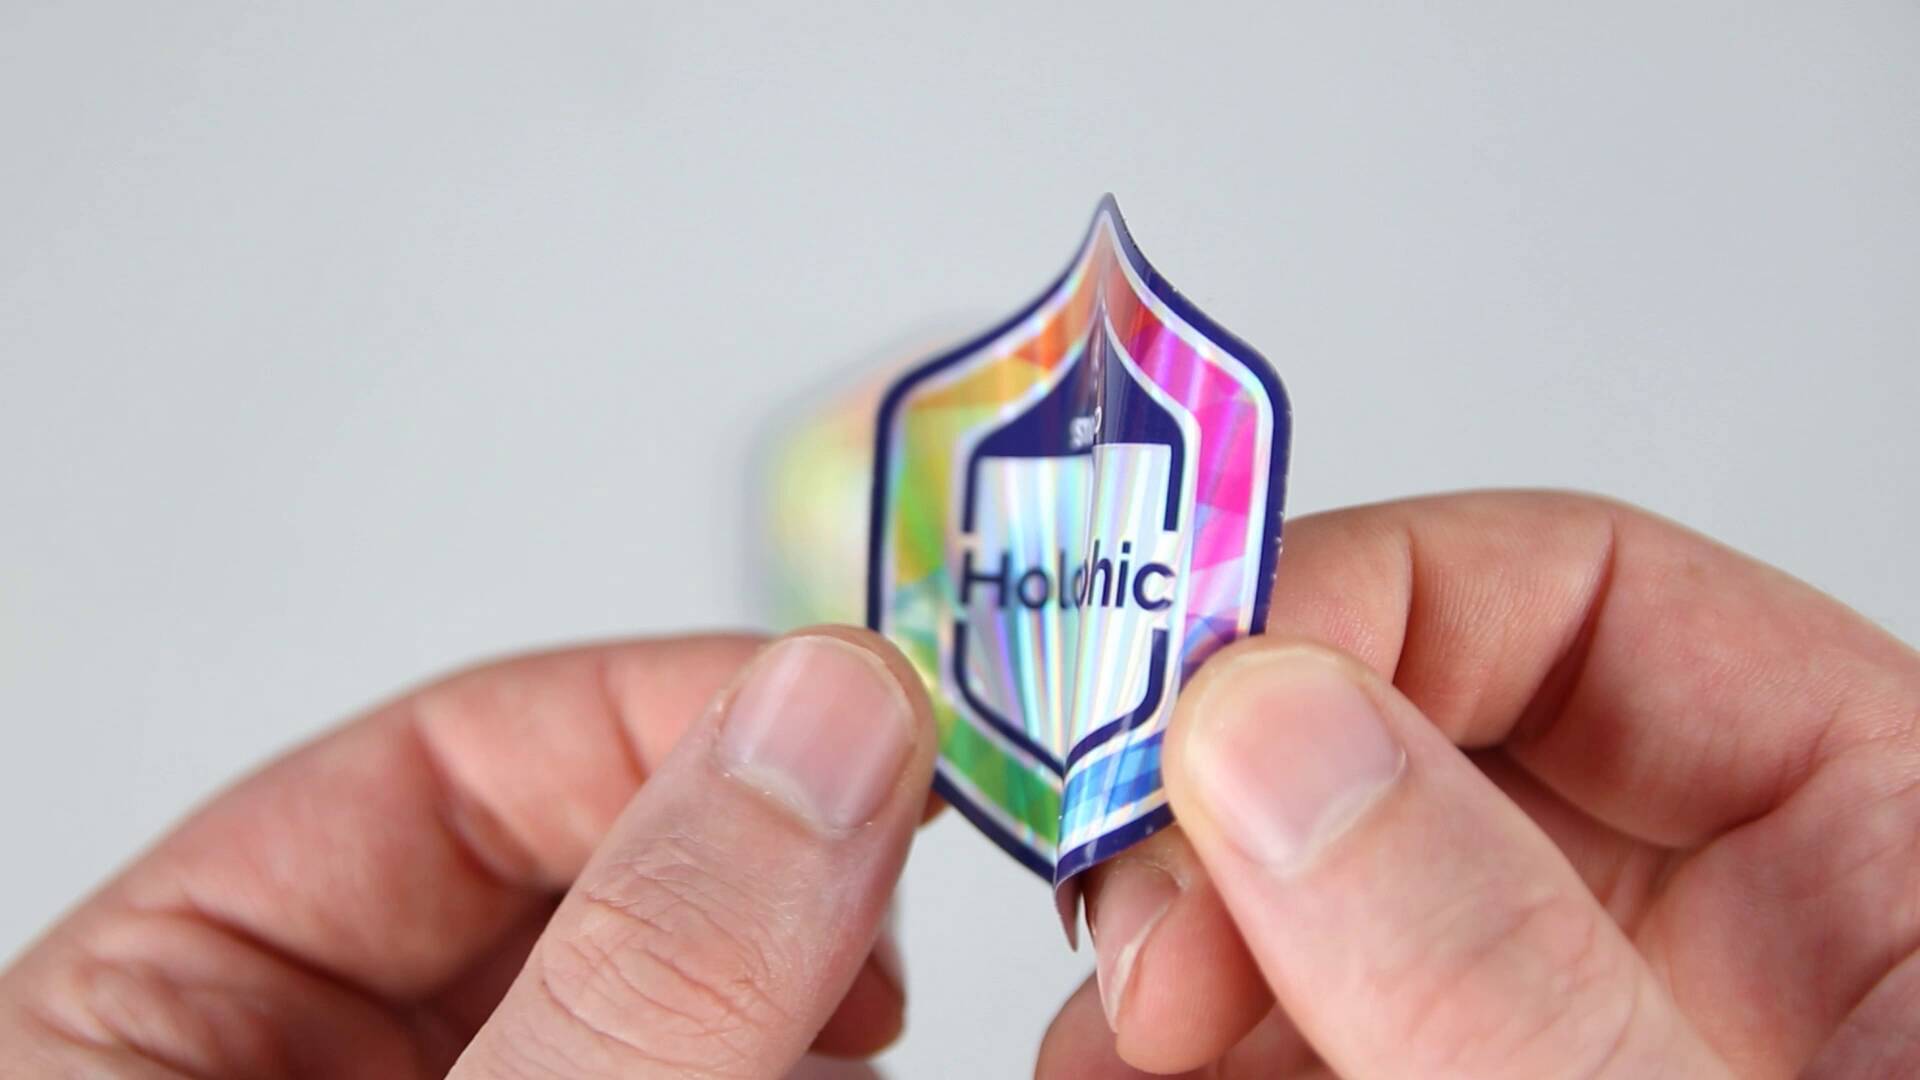 A short video showing what holographic stickers are